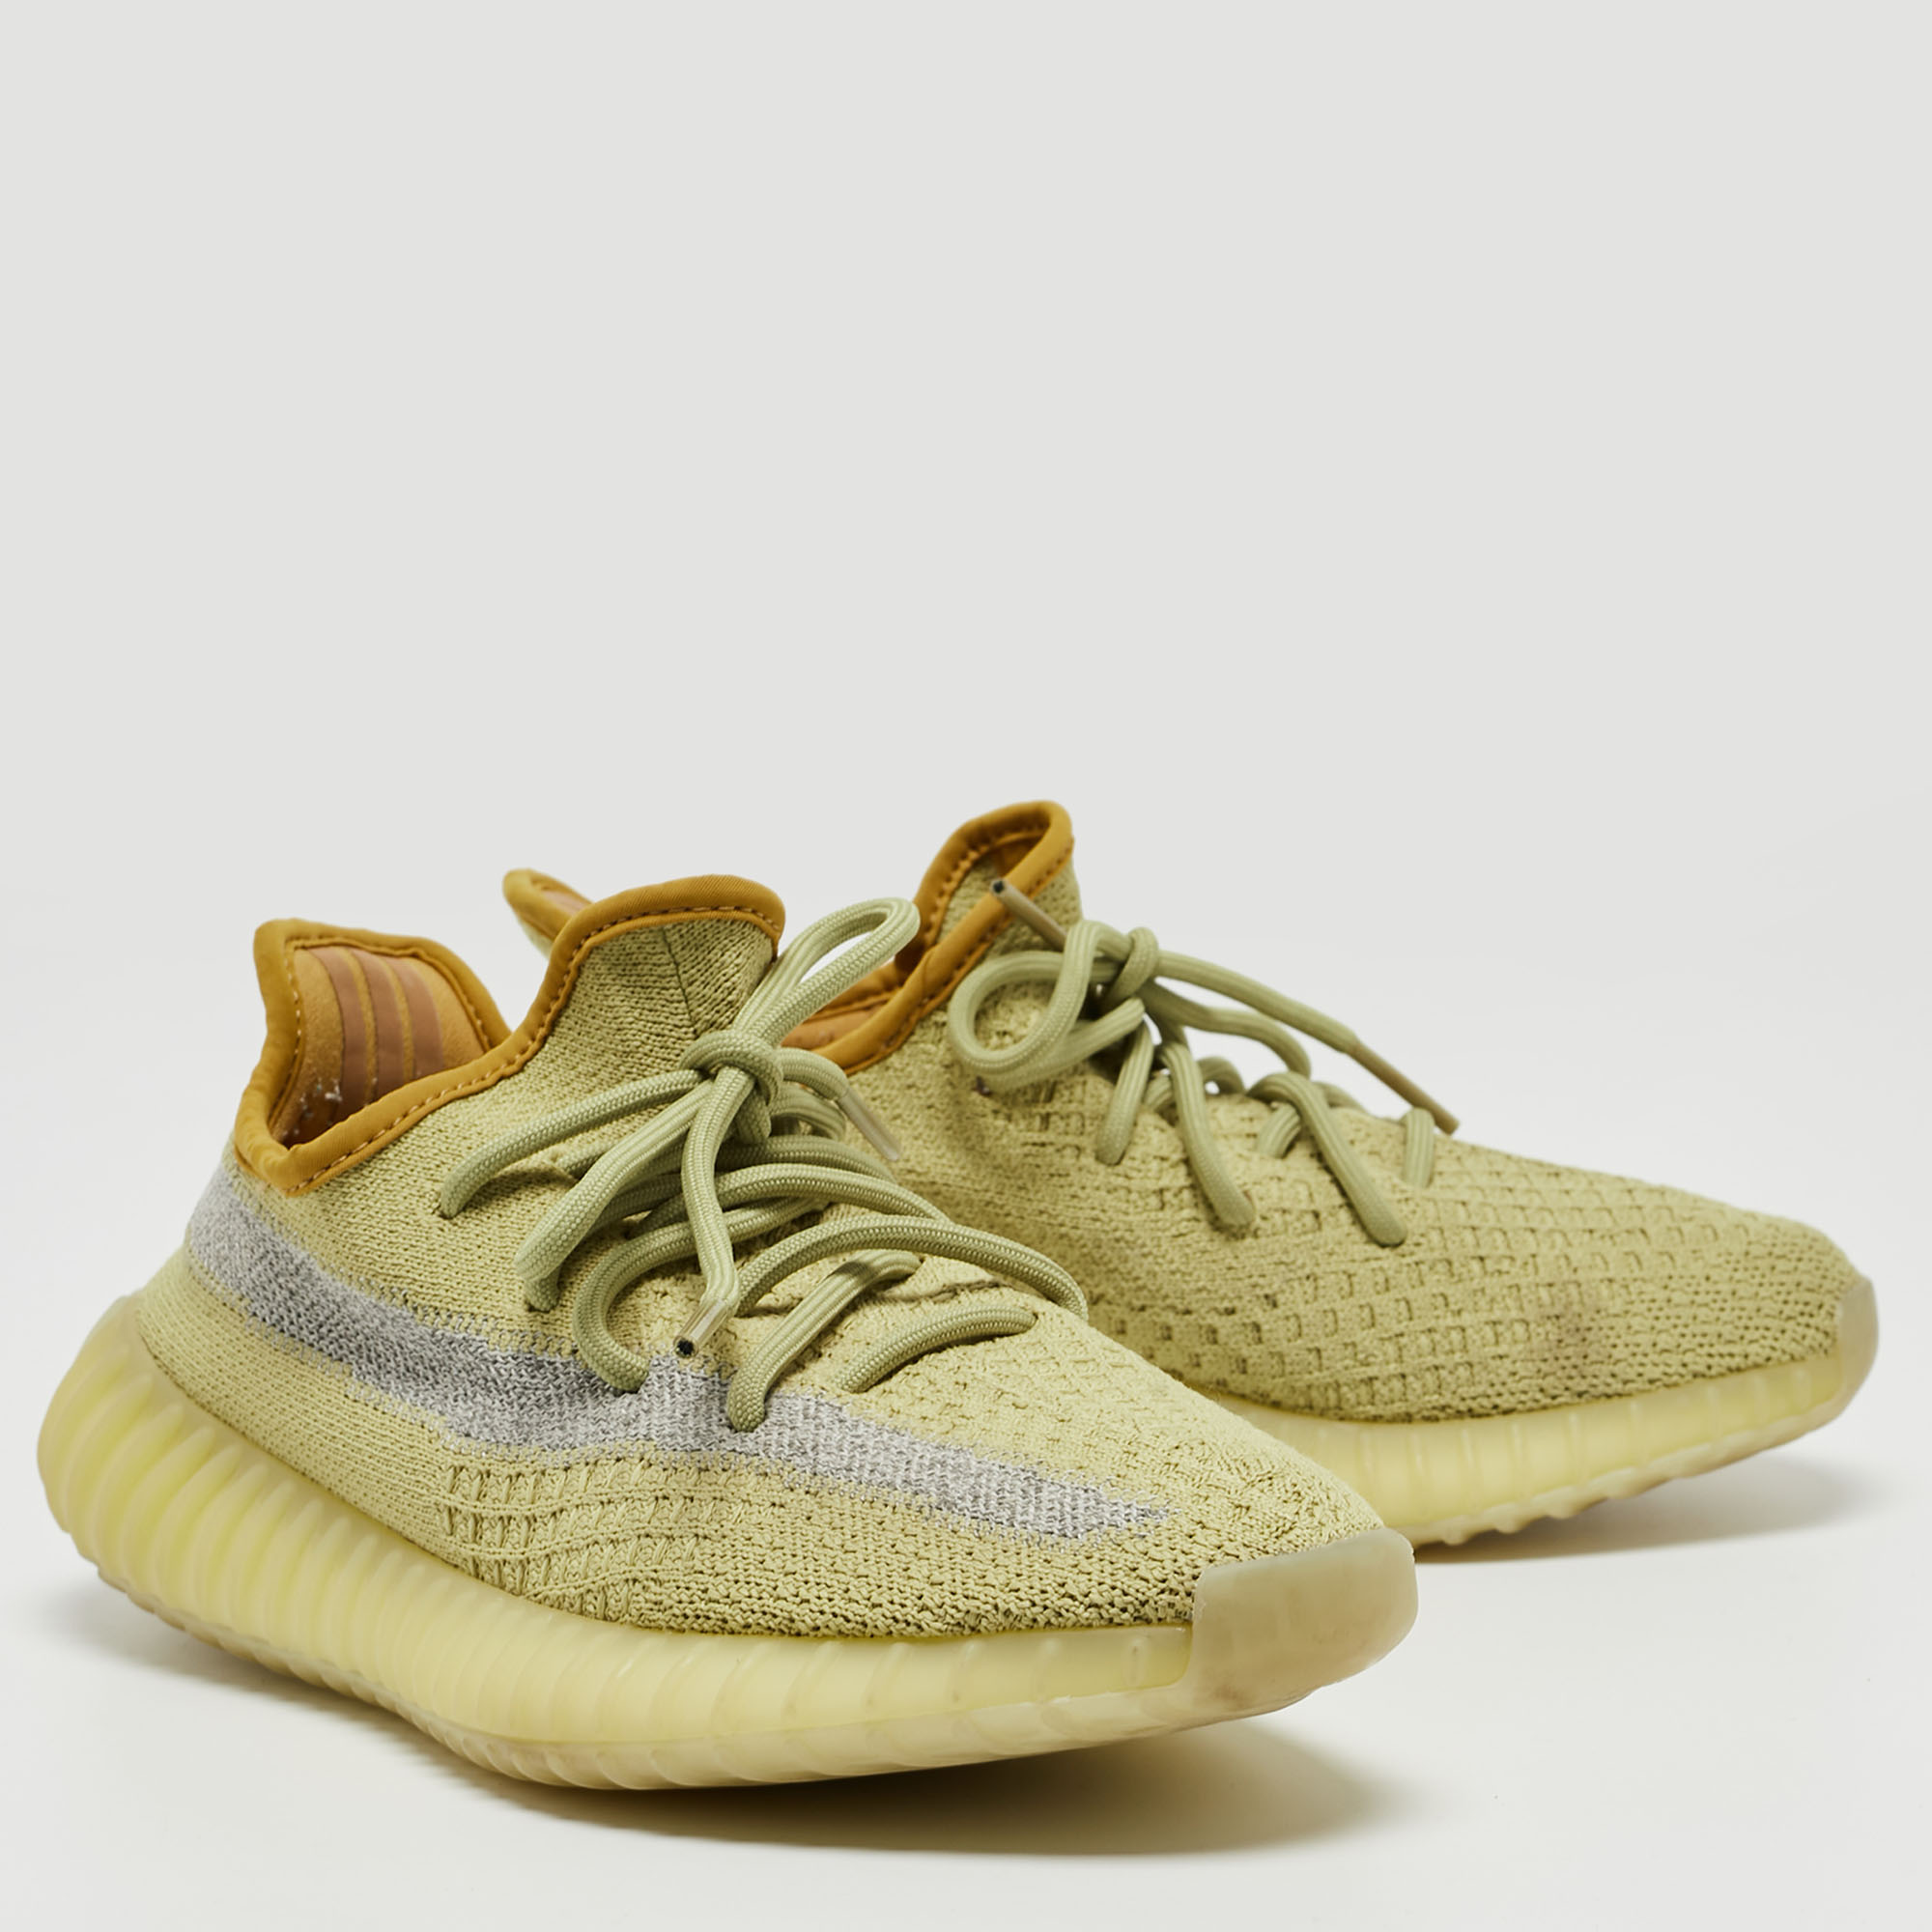 Yeezy X Adidas Yellow Knit Fabric Boost 350 V2 Marsh Sneakers Size 38